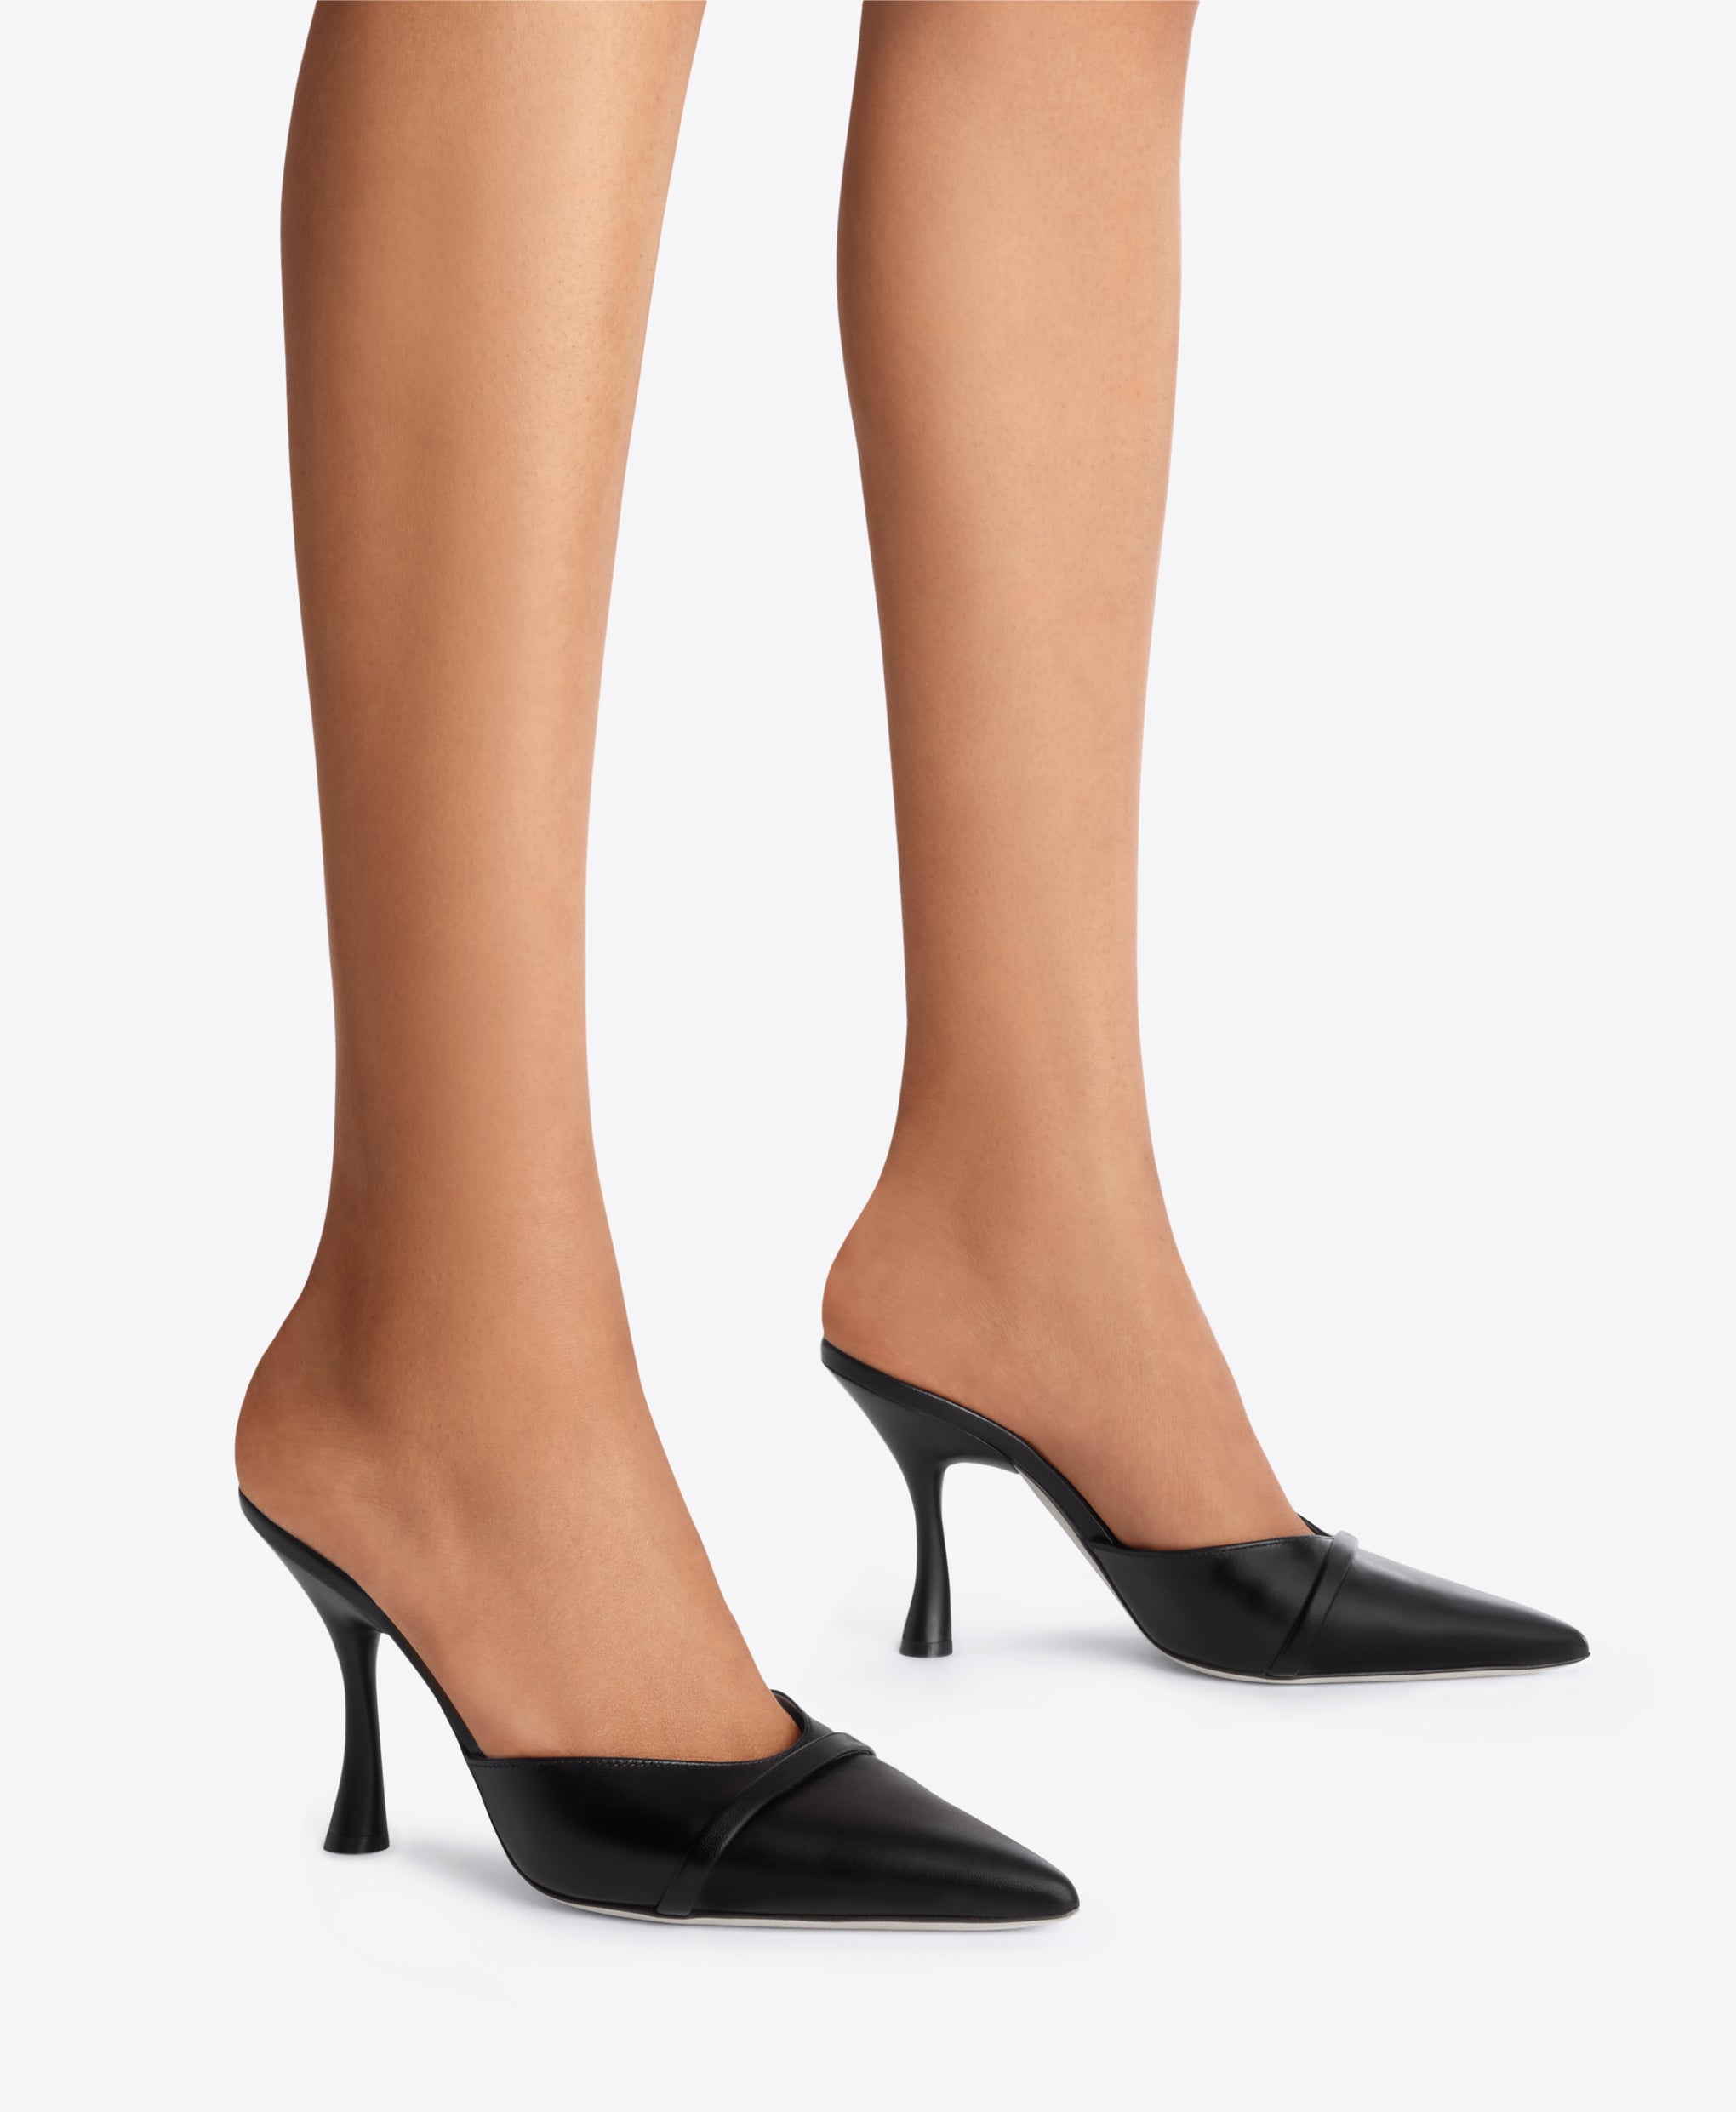 Black Leather Pointed Toe Mules with Single Strap | Malone Souliers